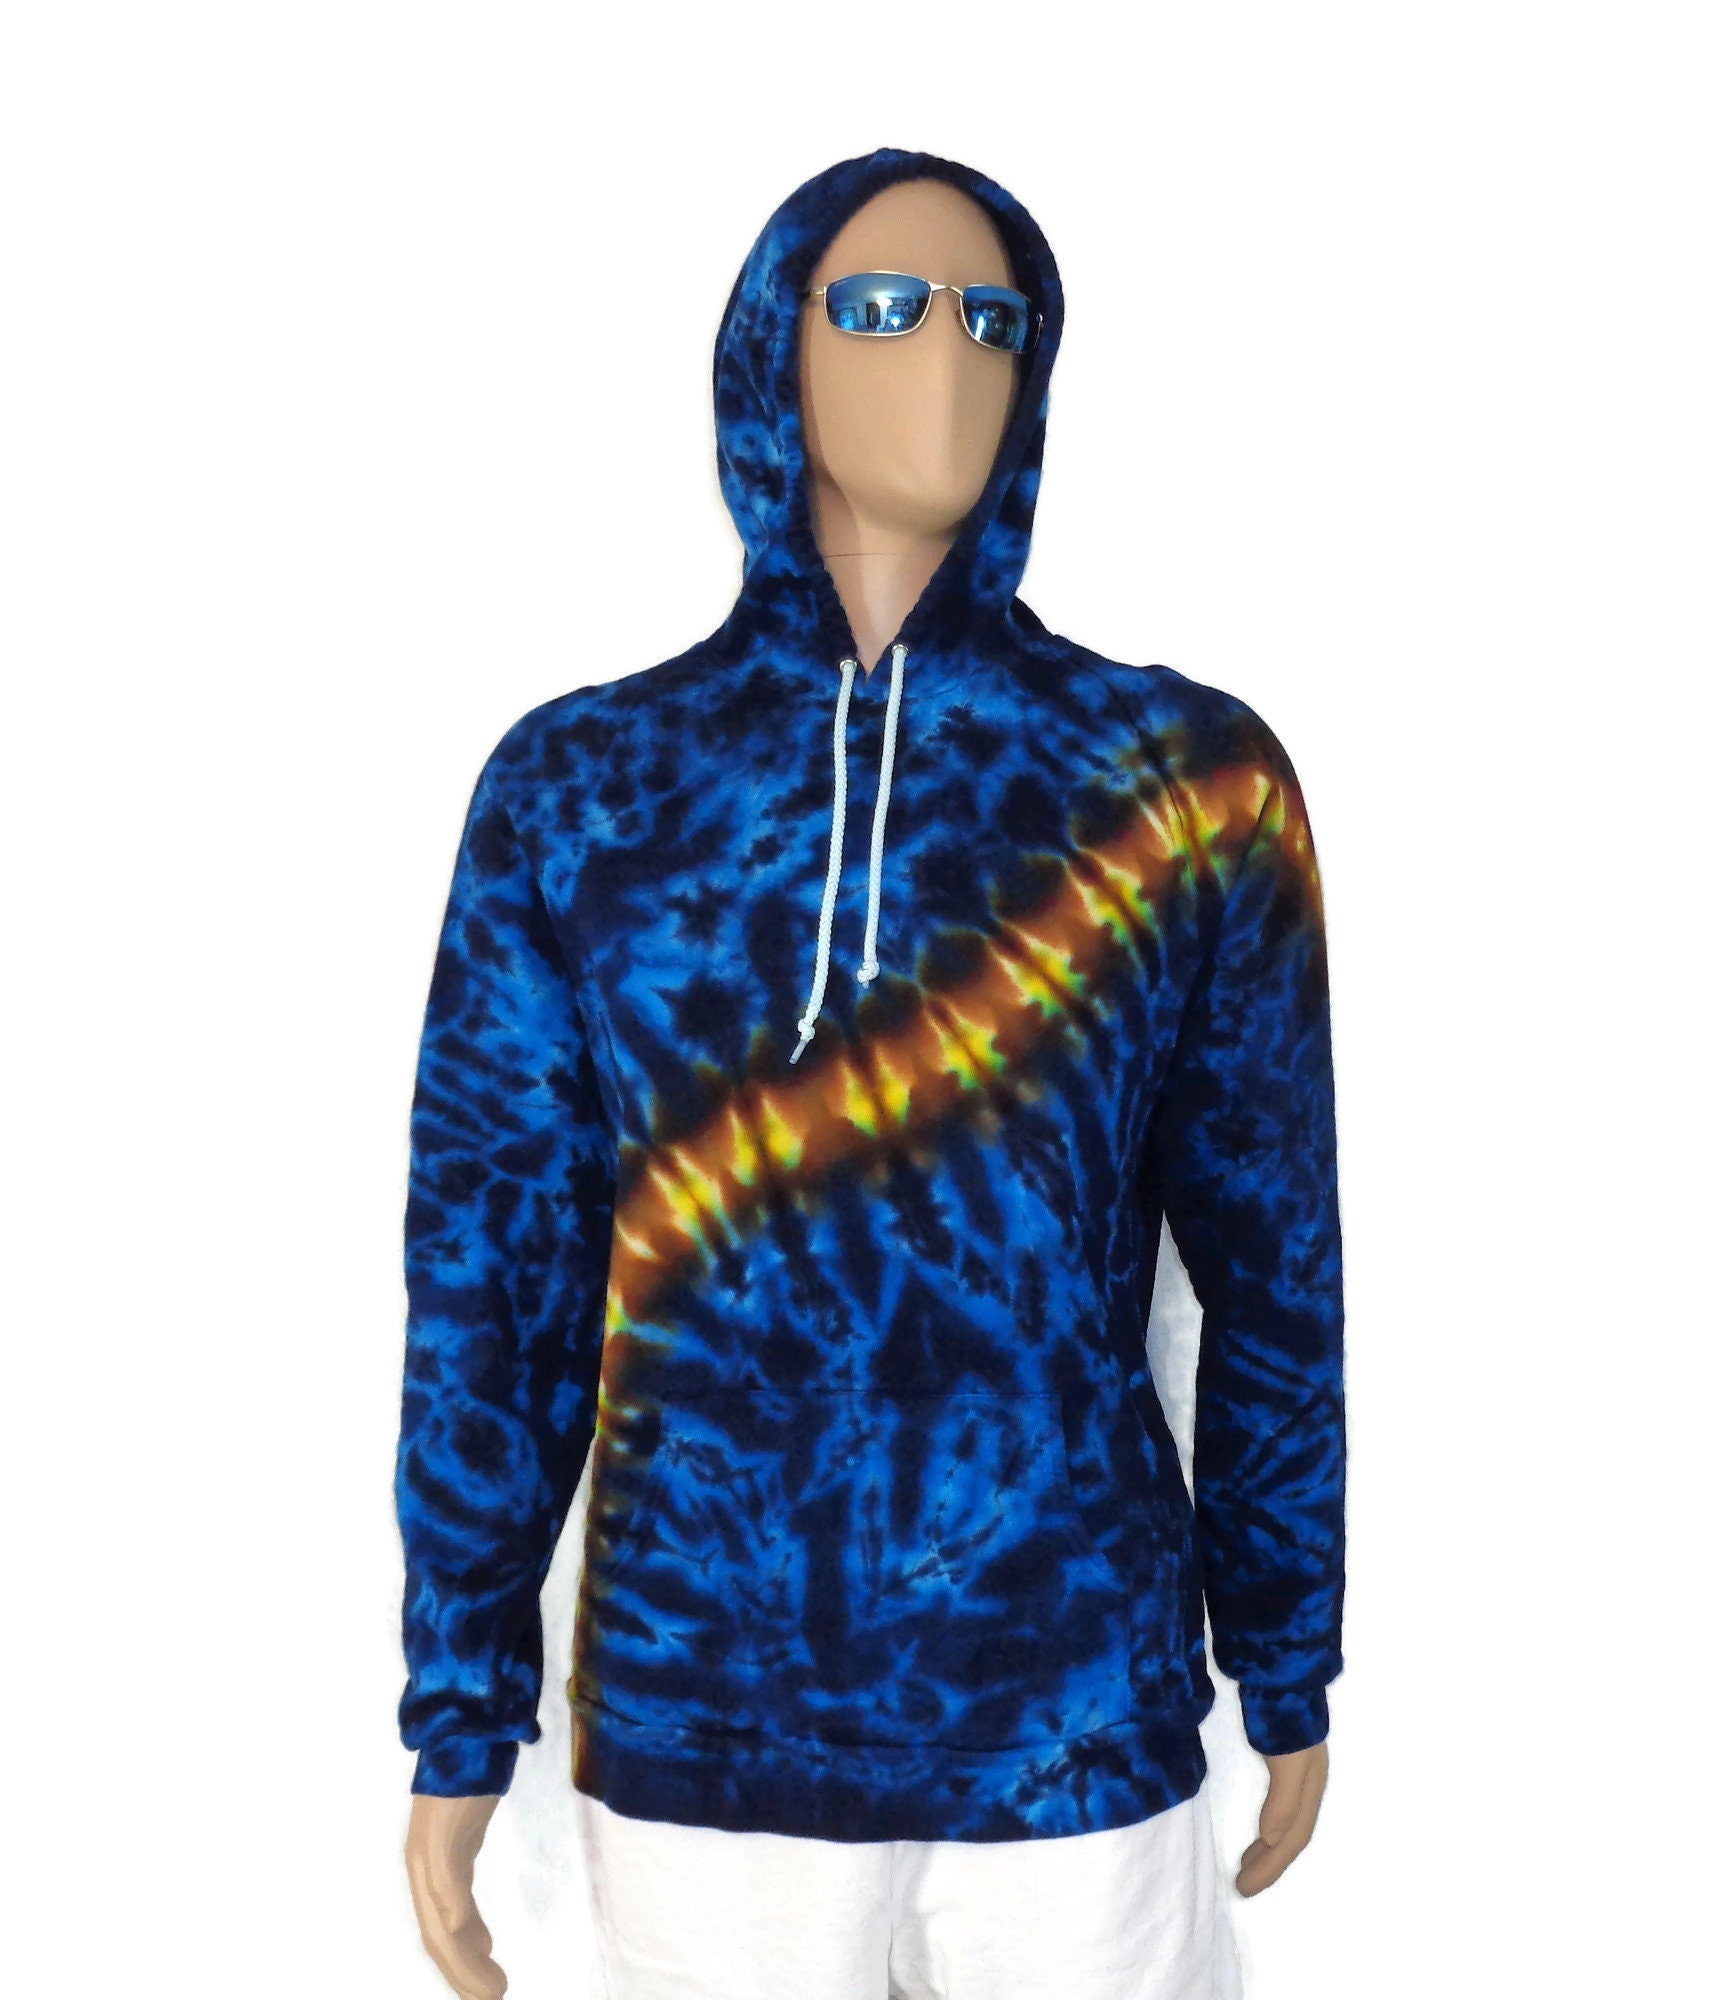 Tie Dye Hoodie XL Unisex Hooded Pullover Sweatshirt Front Pocket Blue Marble Golden Stripe Size Extra Large Mens Awesome Festival Gear